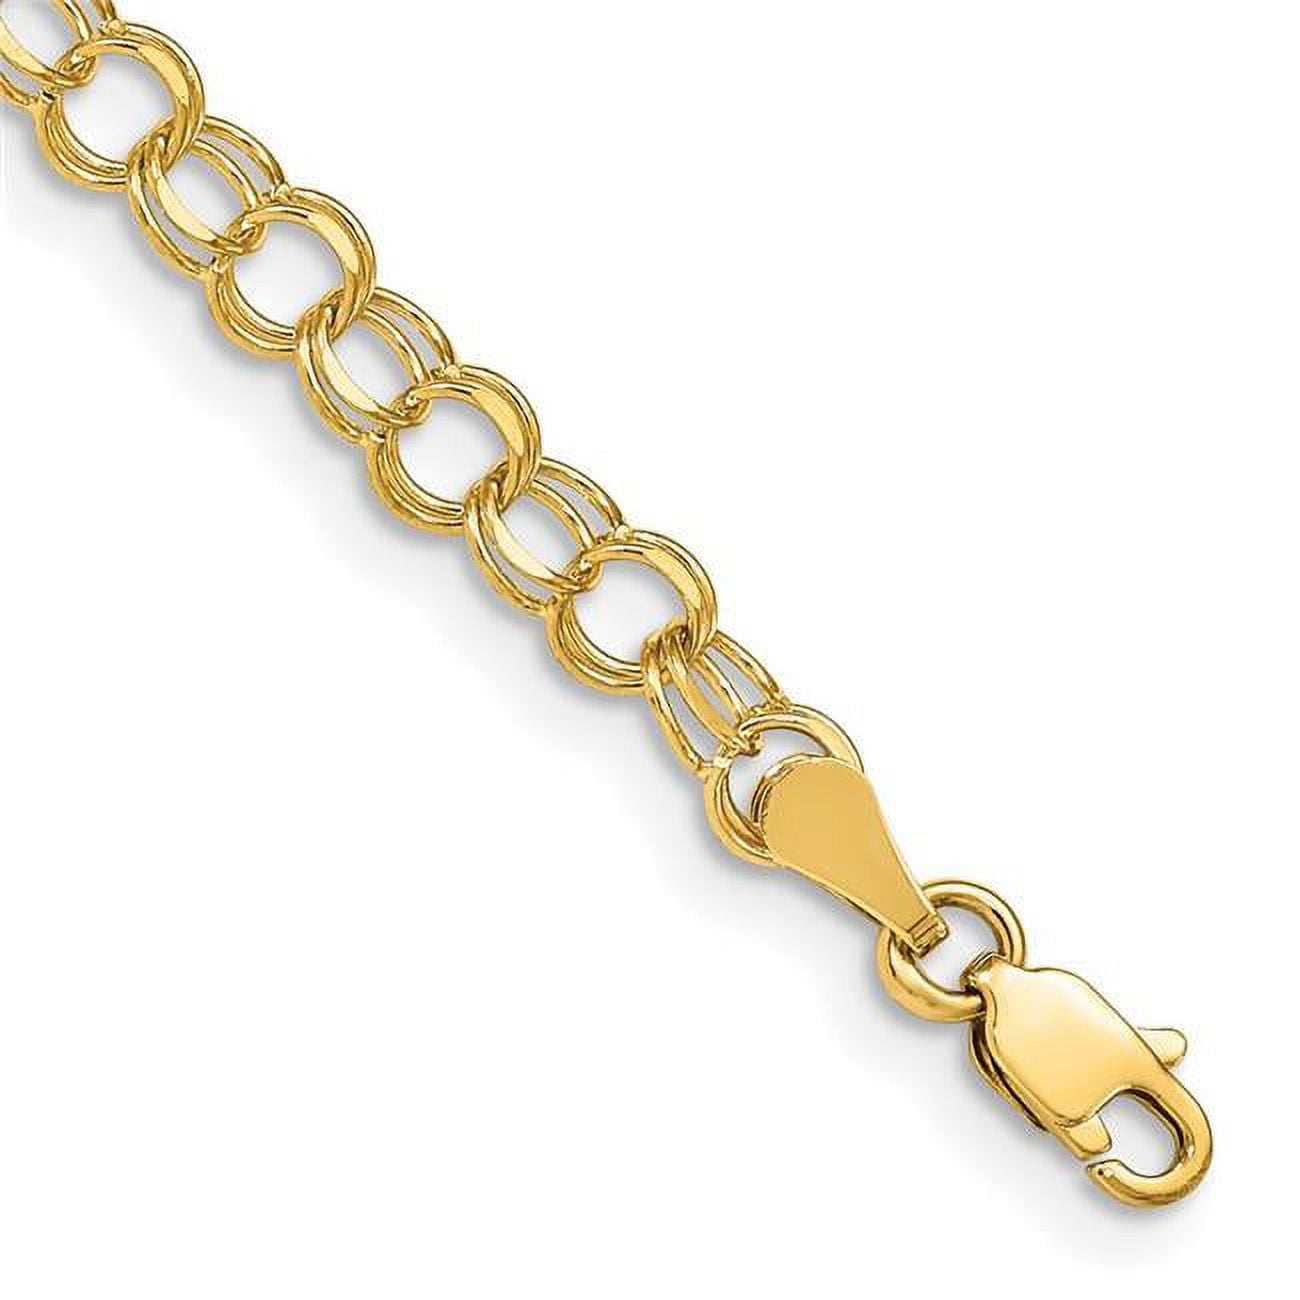 Chain Link Bracelets | Yellow, White, and Rose Gold